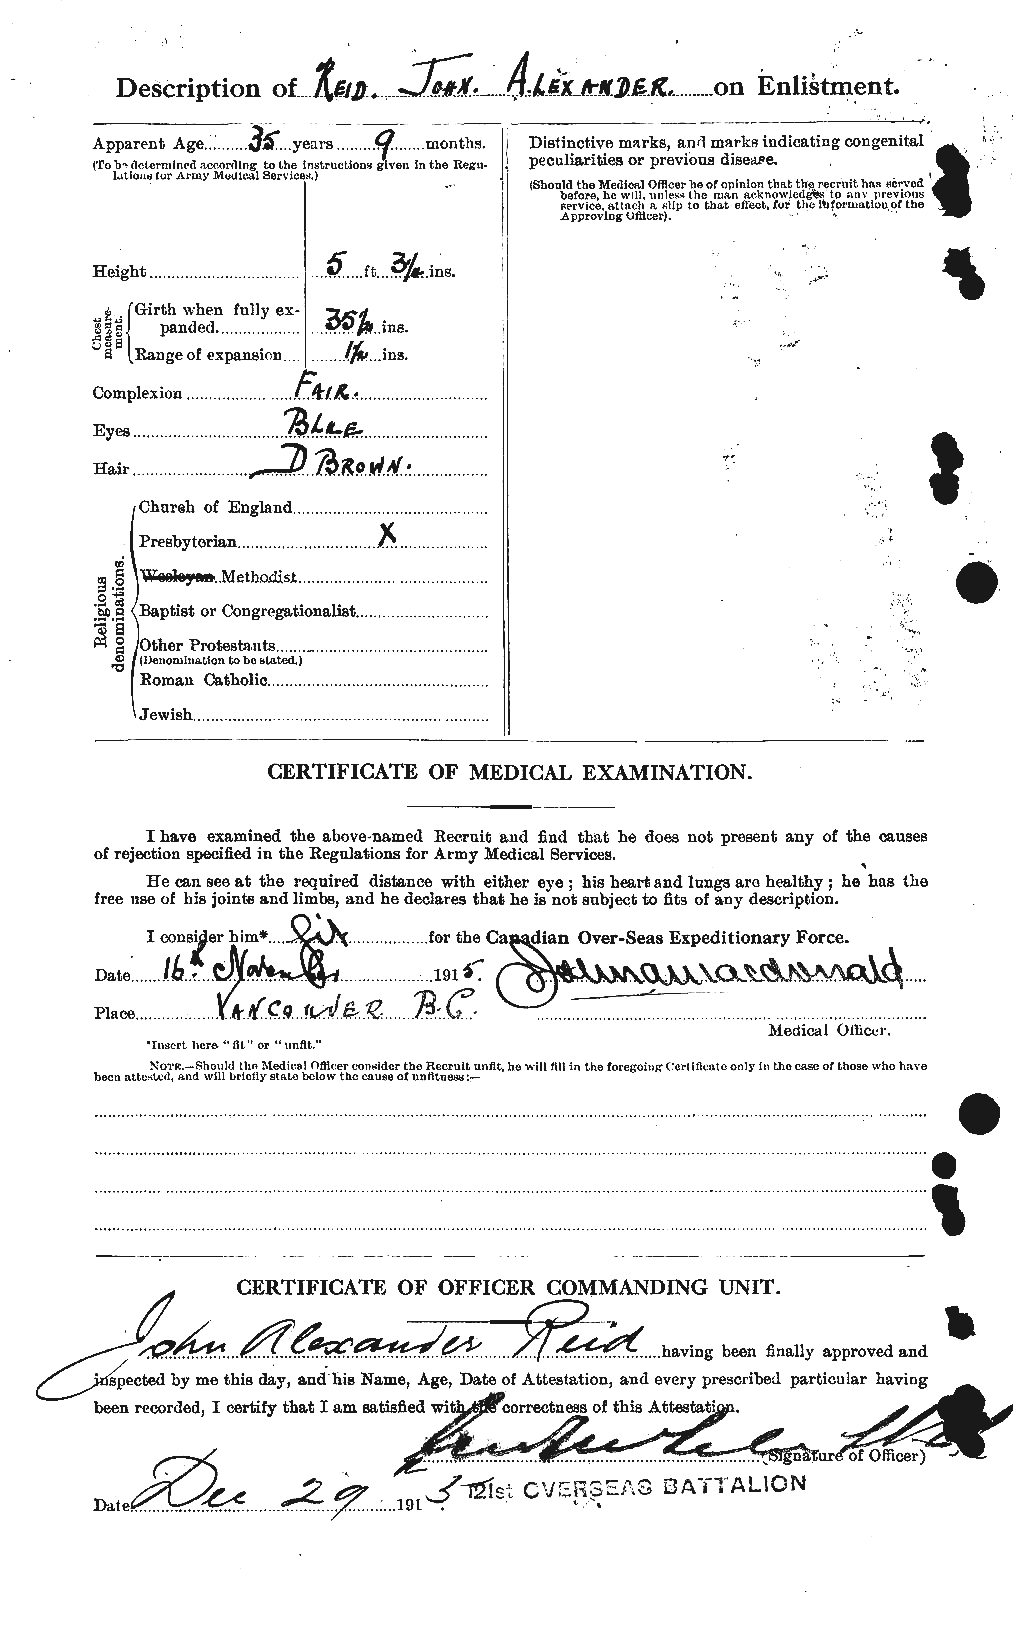 Personnel Records of the First World War - CEF 598819b